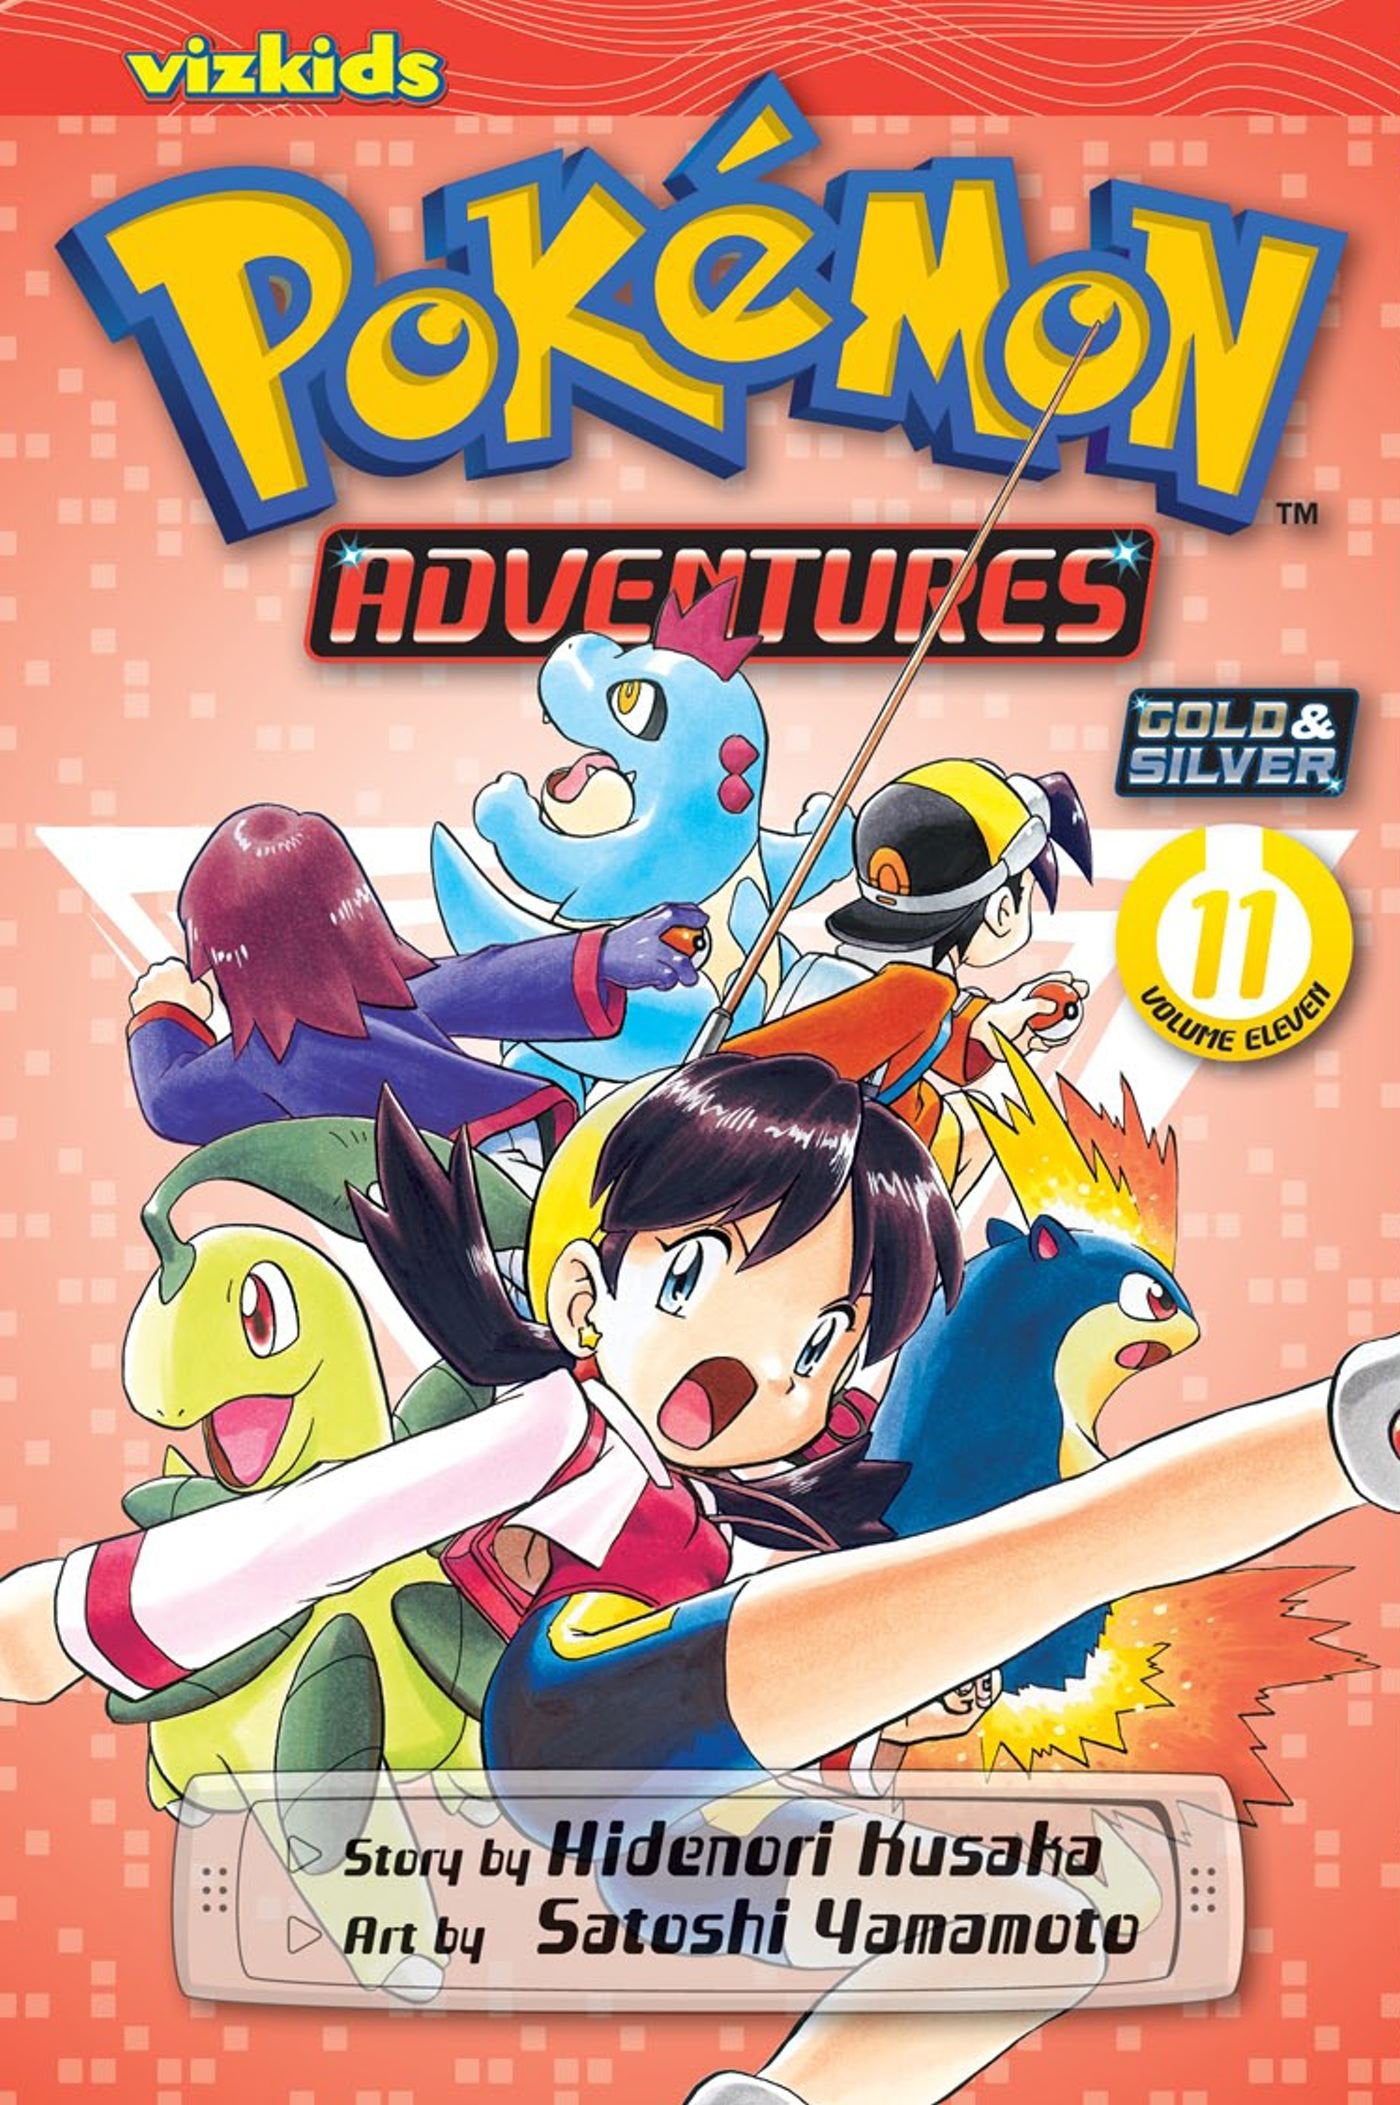 Pokémon Adventures (Gold and Silver), Vol. 11 | CCGPrime